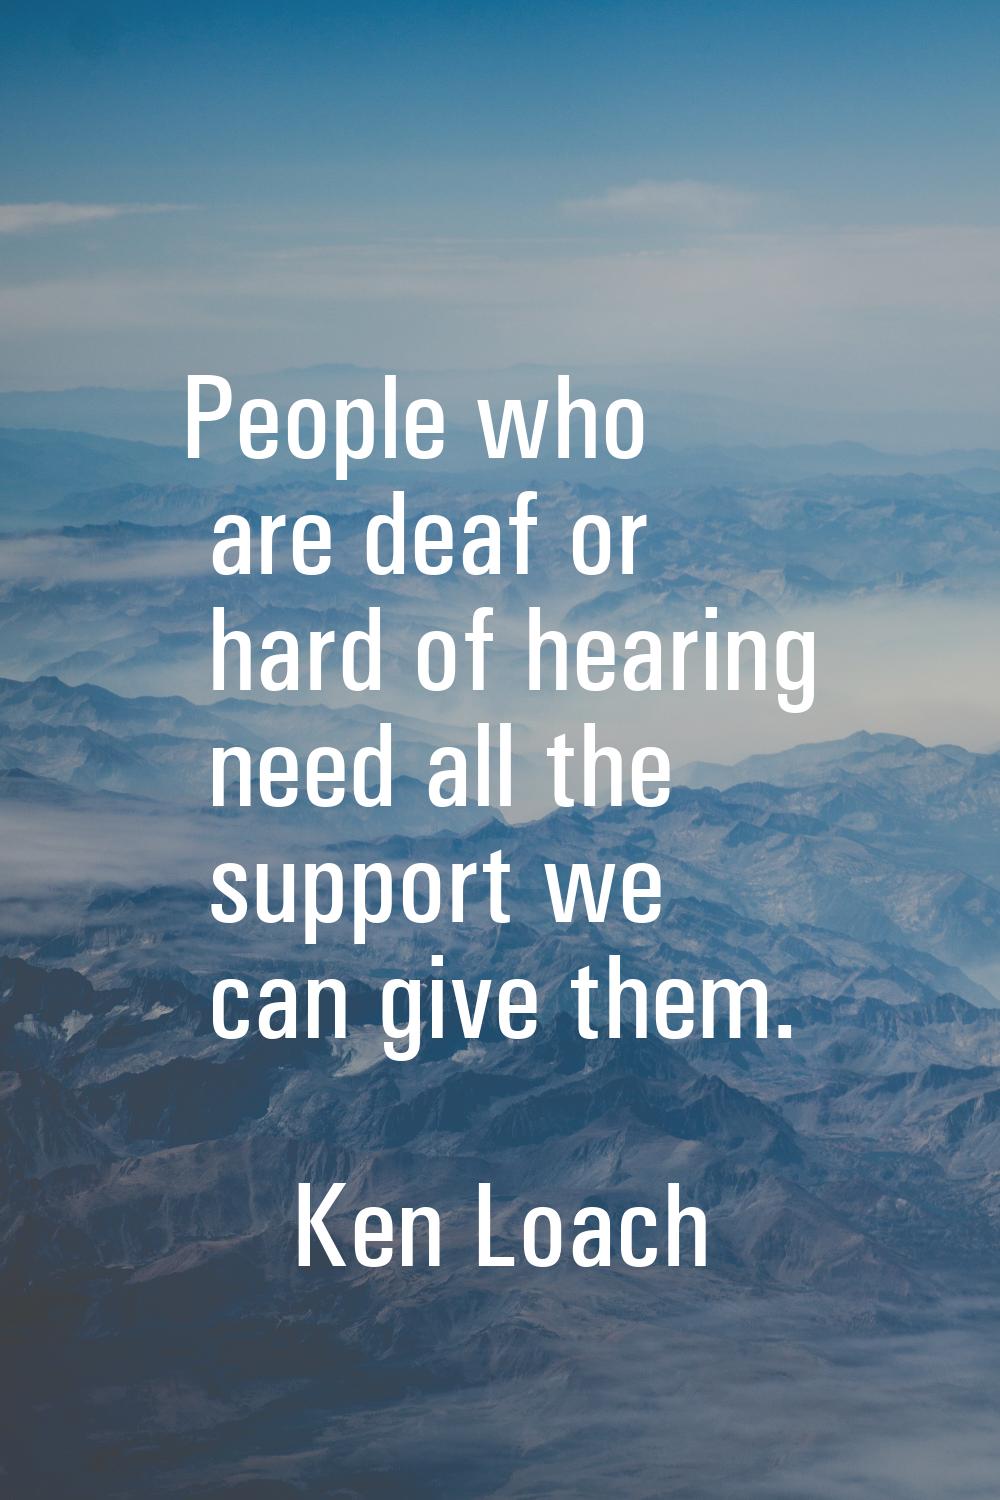 People who are deaf or hard of hearing need all the support we can give them.